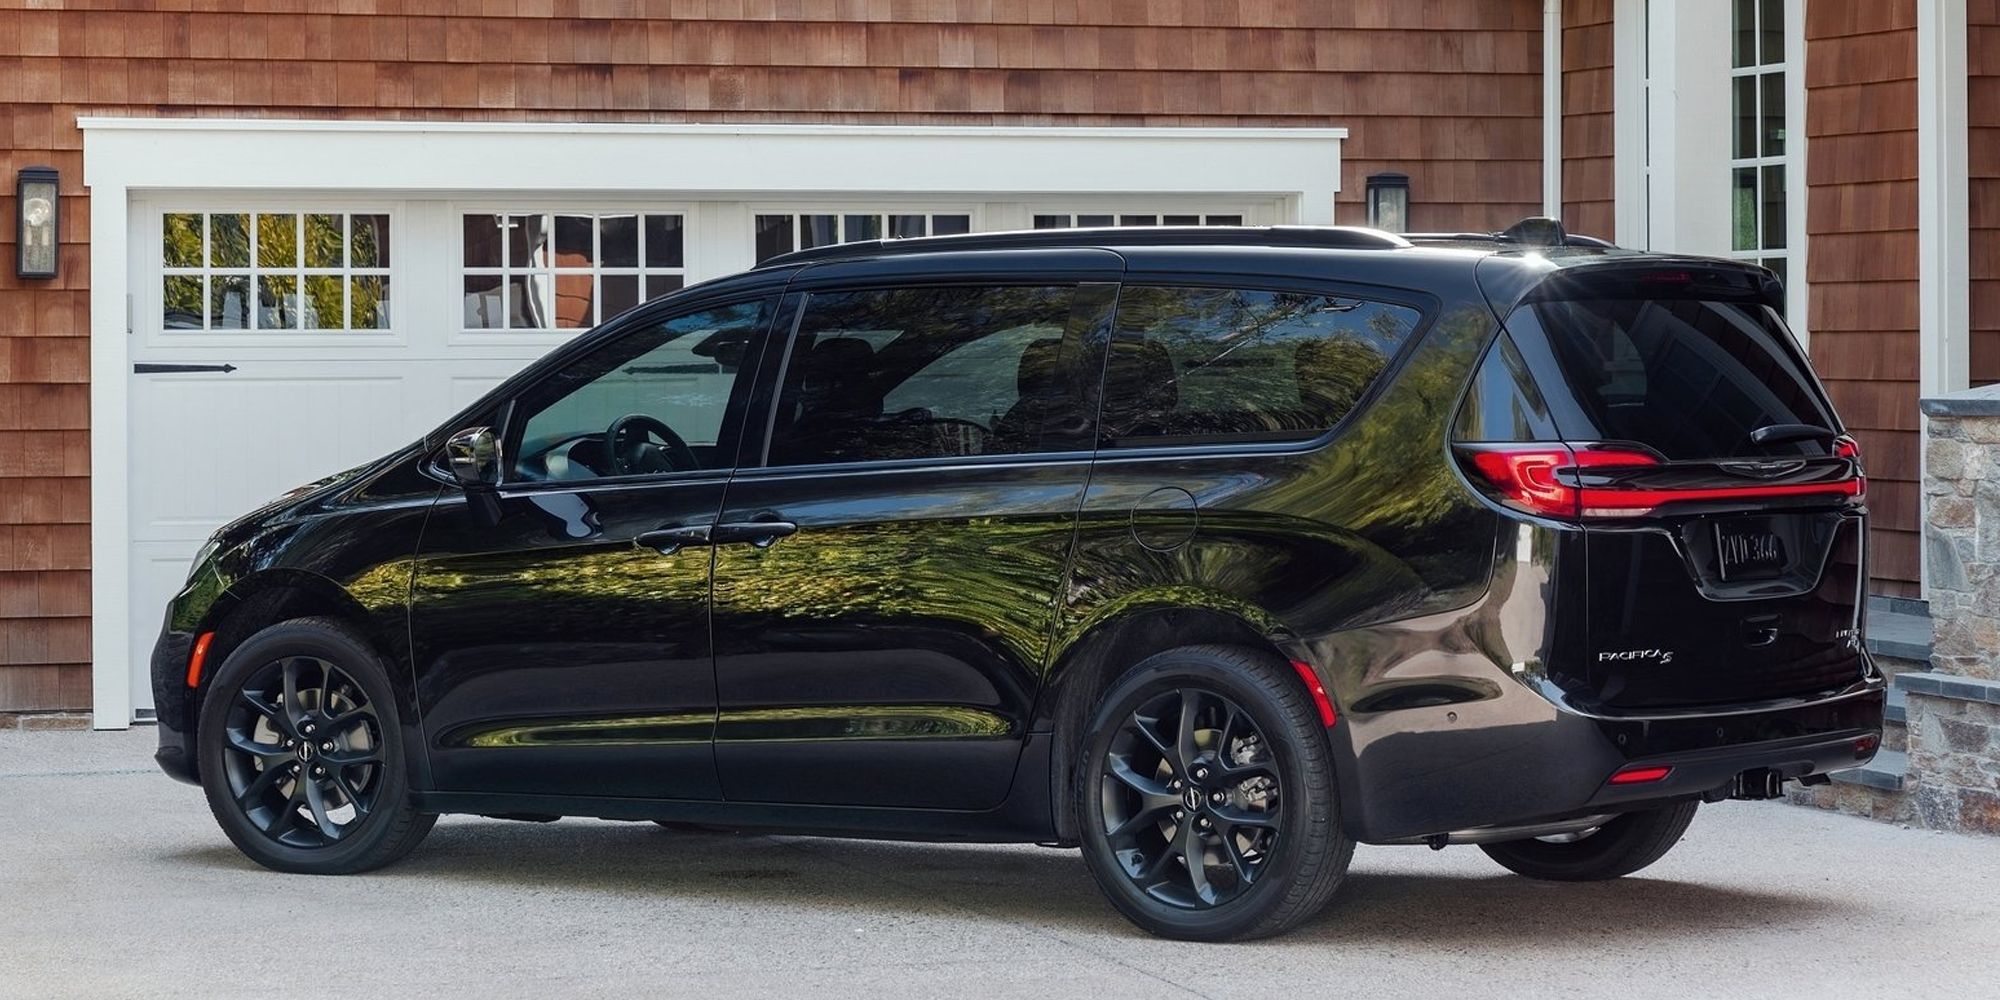 Rear 3/4 view of a black Pacifica